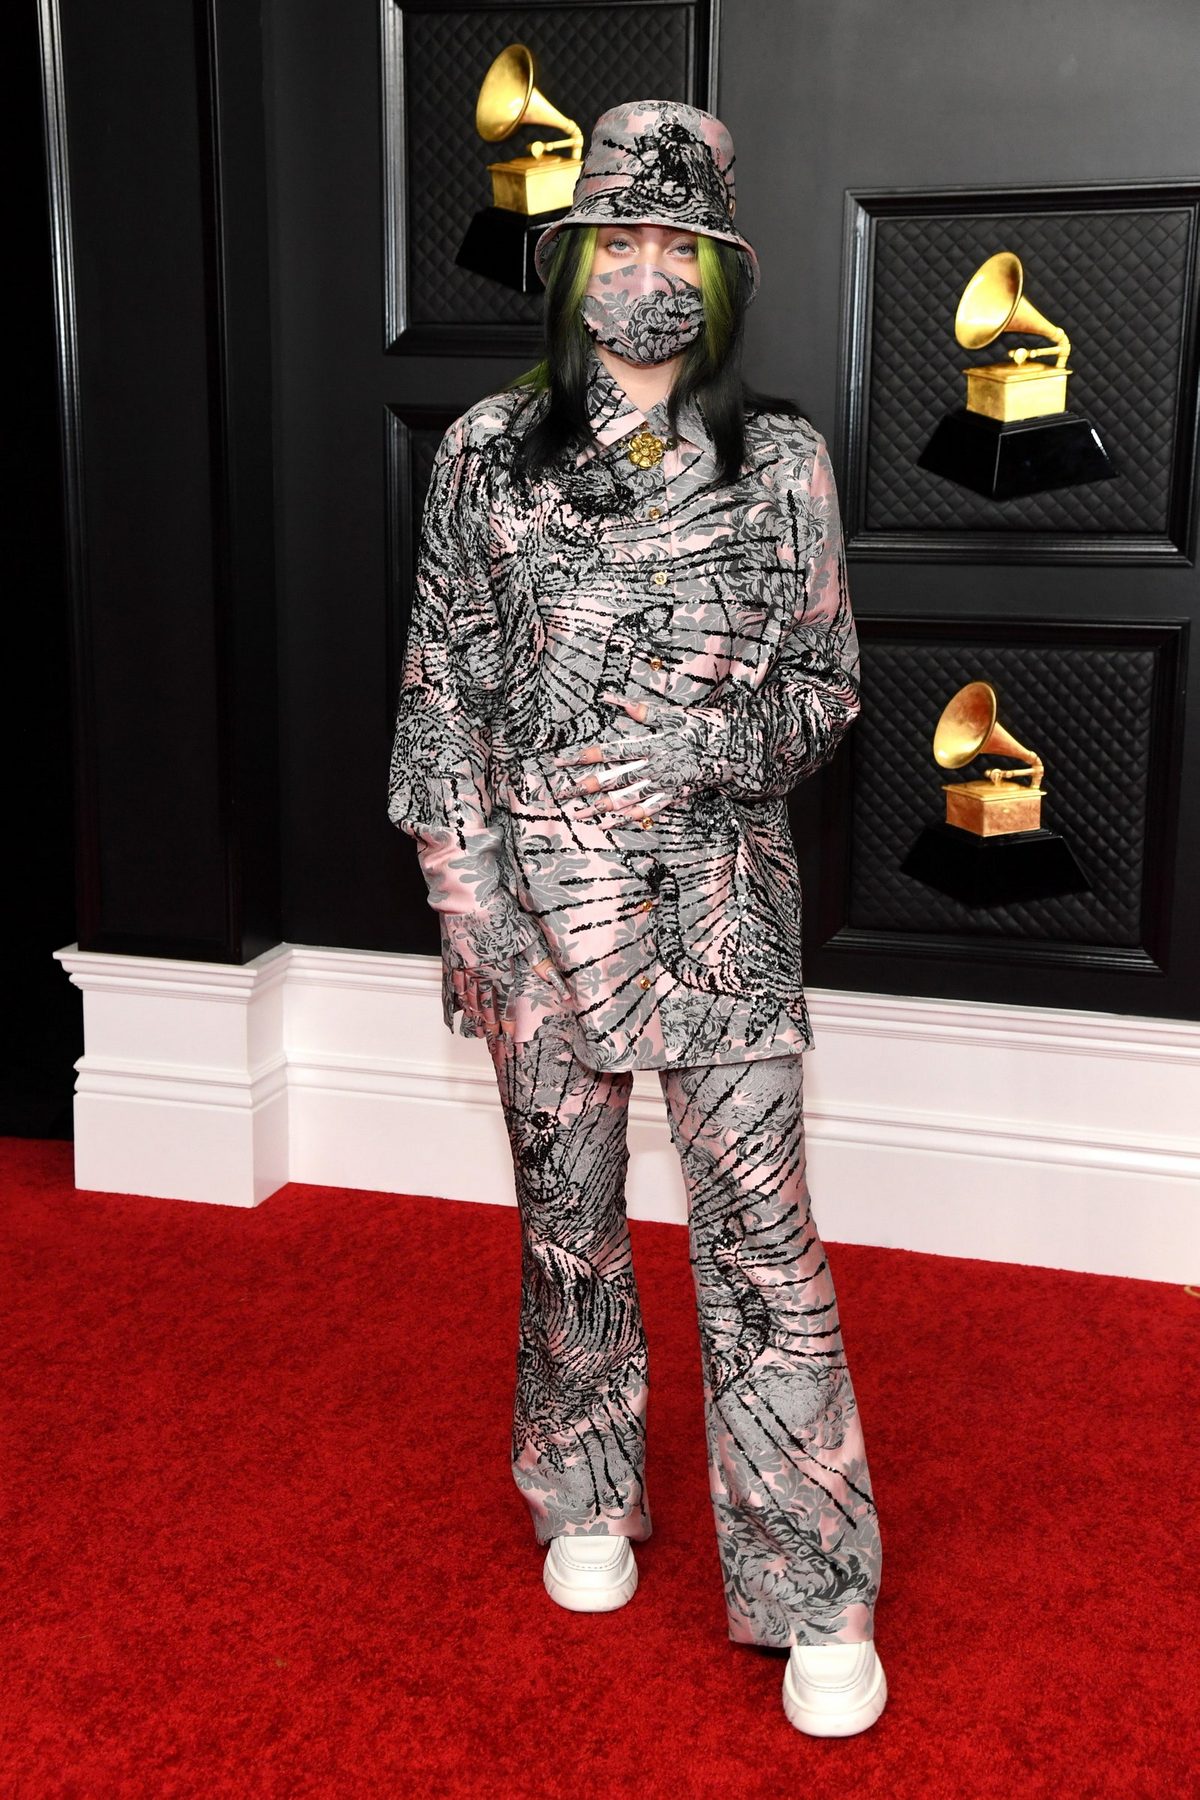 63rd Annual Grammy Awards Outfit